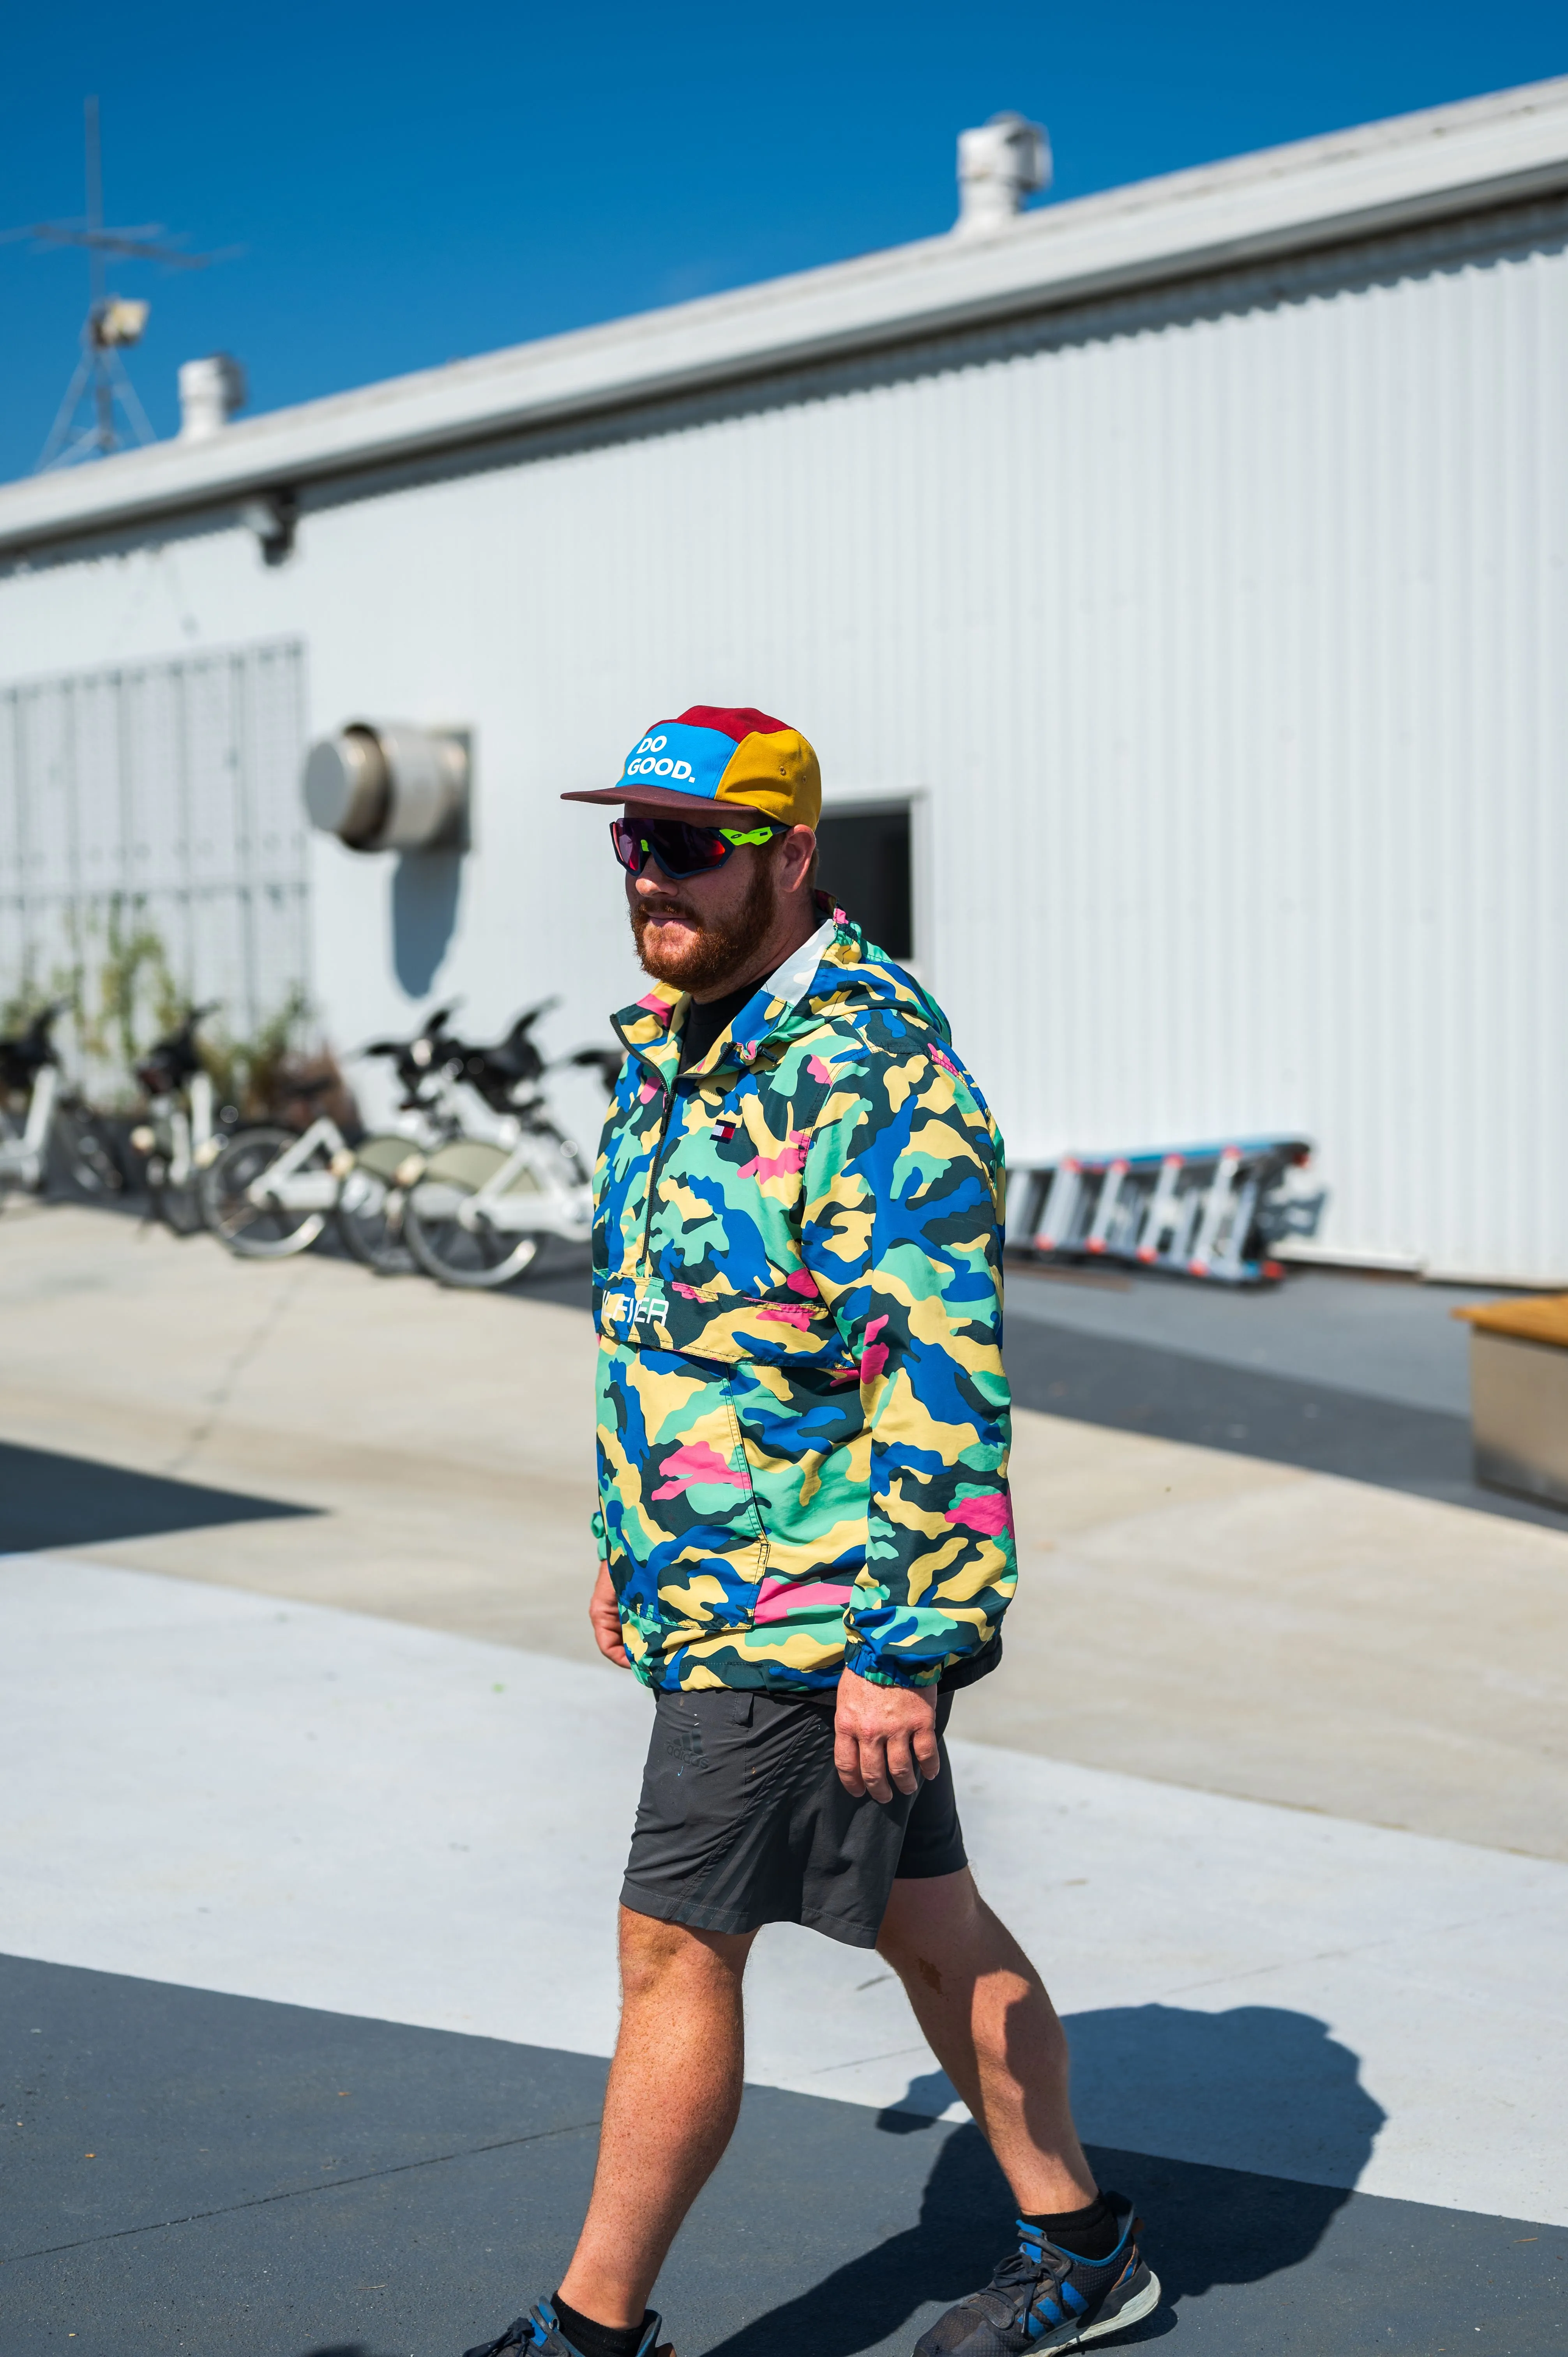 Man wearing a colorful camo jacket and multicolored cap walking in a sunny outdoor area with bicycles in the background.